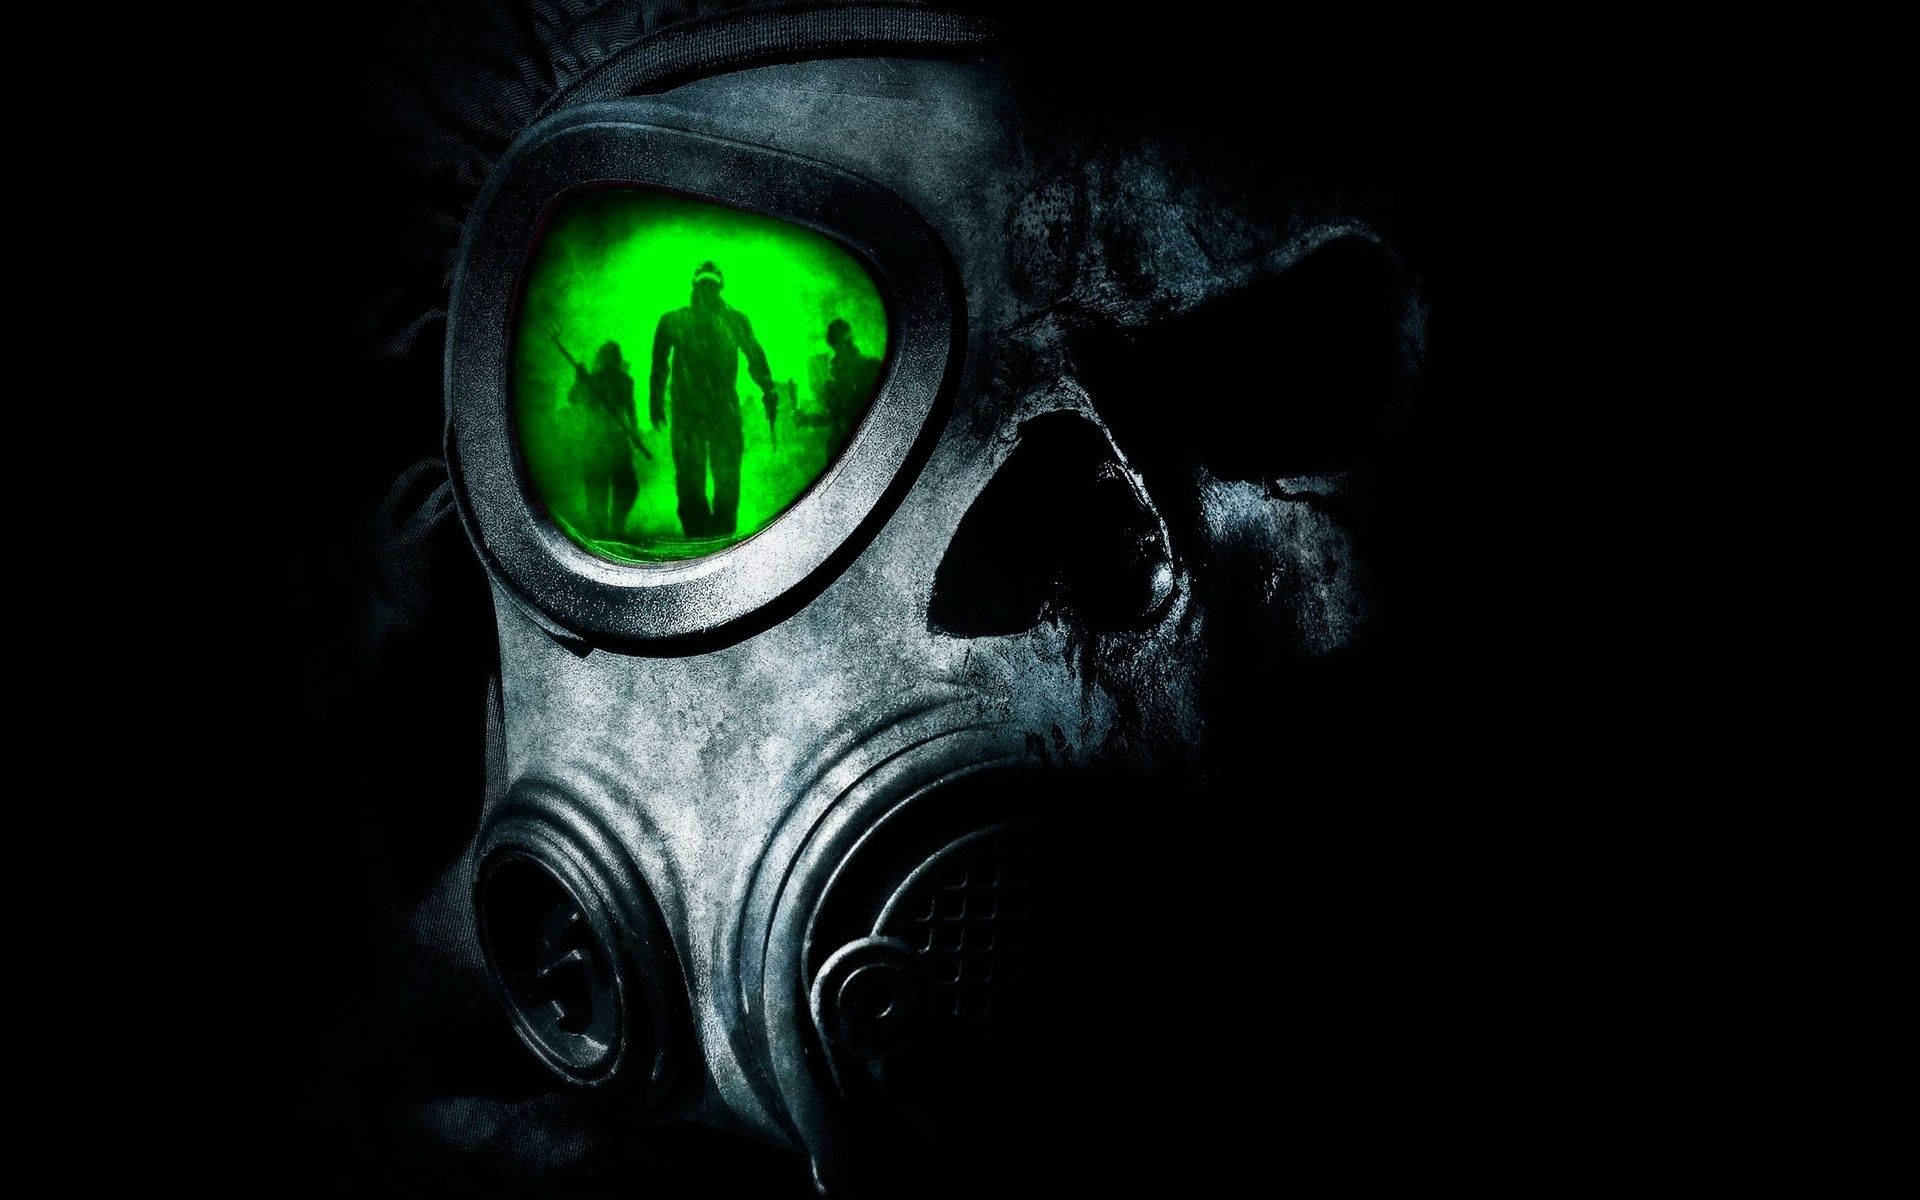 Mystery Gas Mask Graphic Art Background